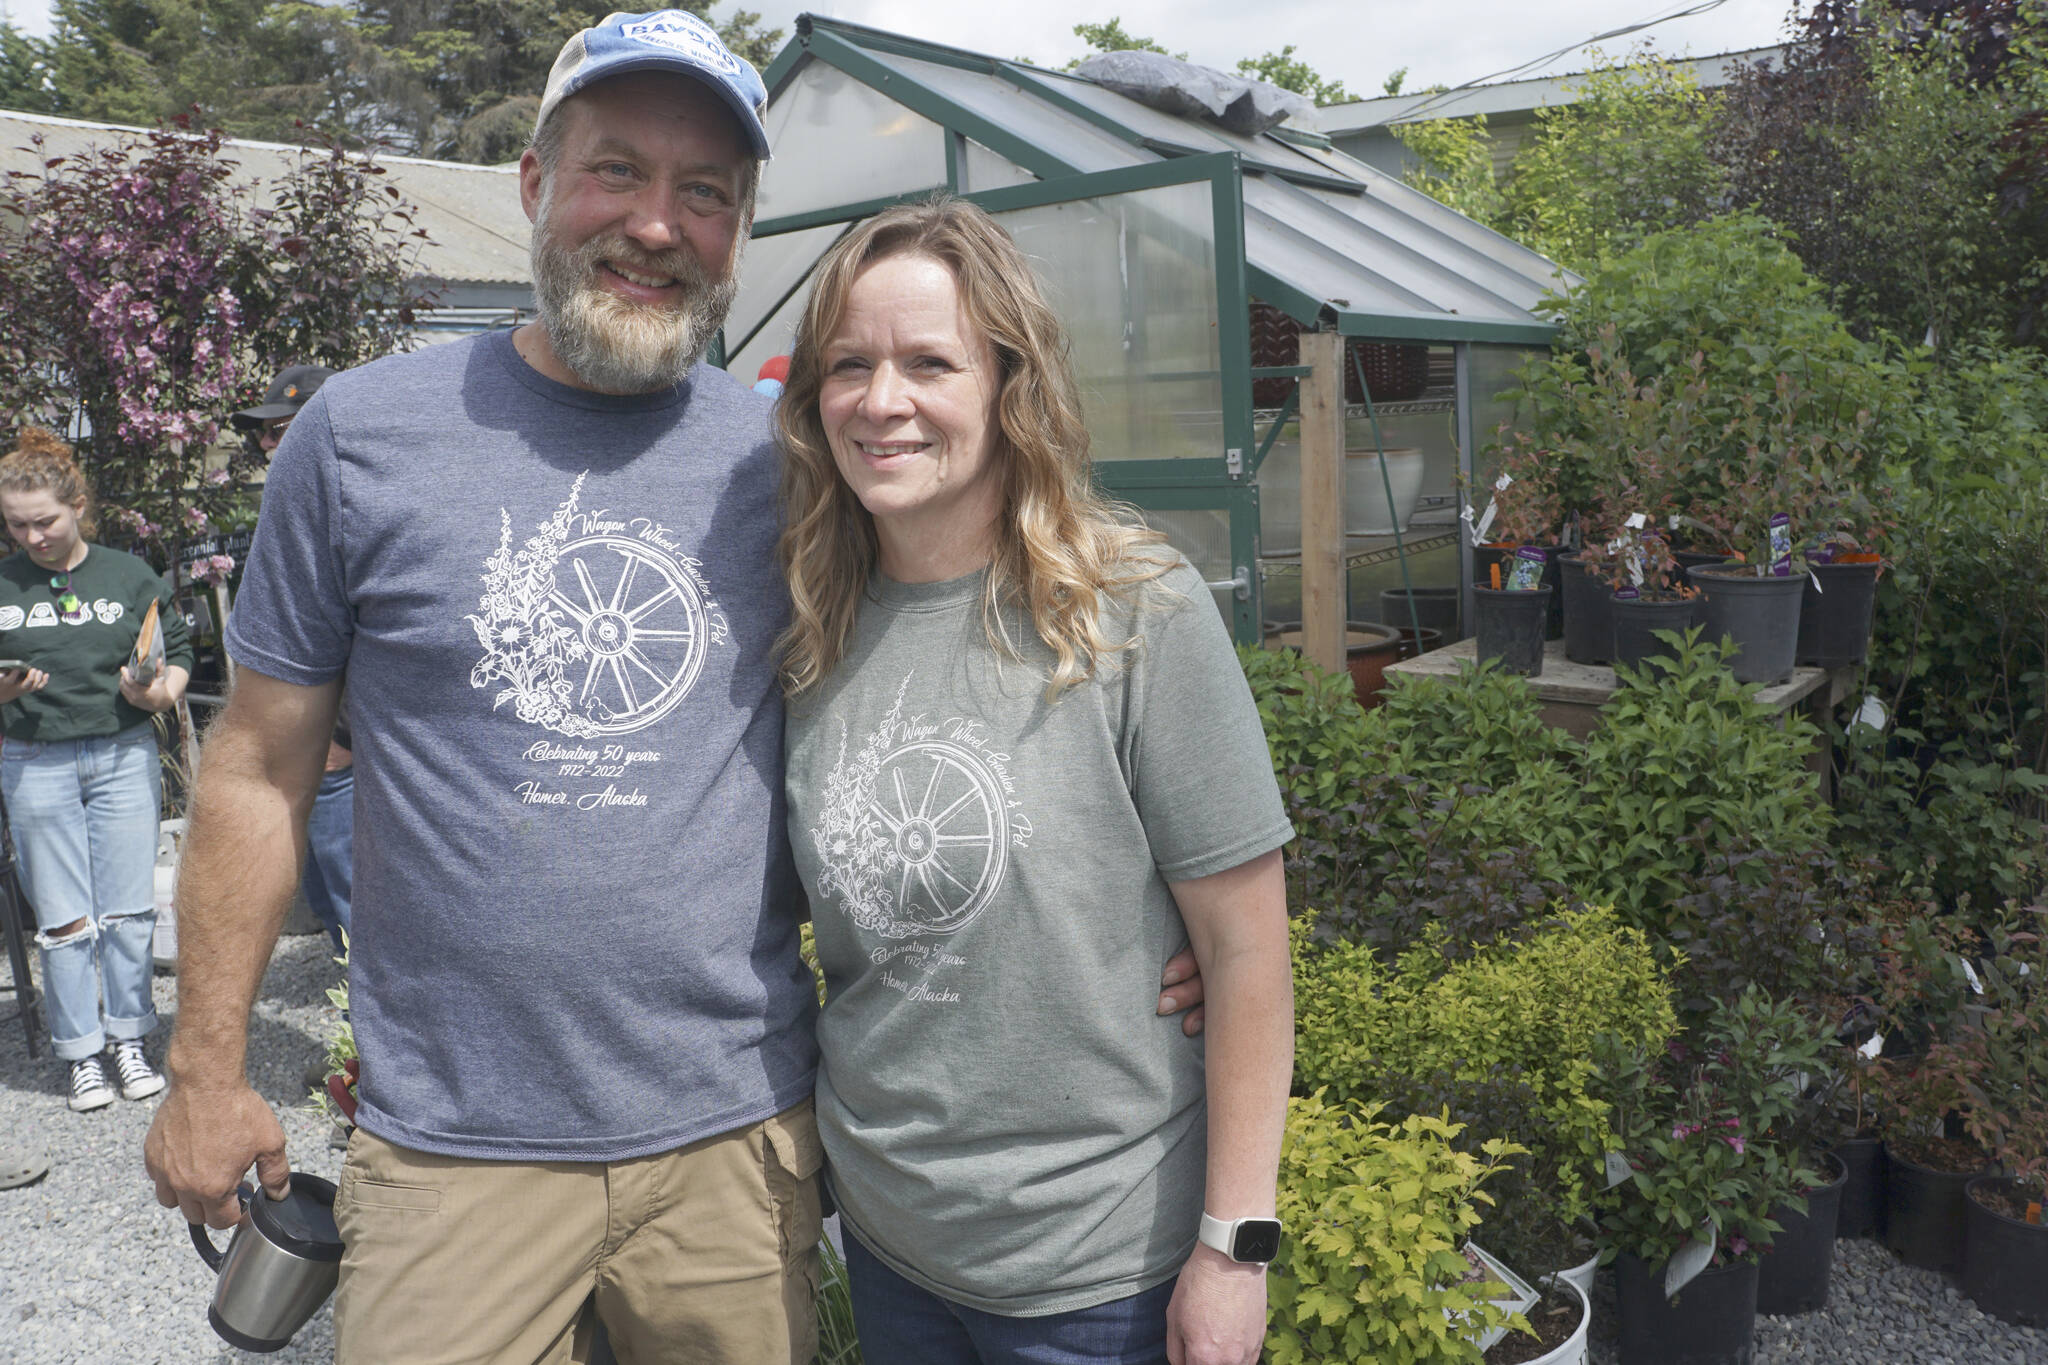 Steven and Stacey Veldstra pose for a photo at the 50th anniversary celebration of Wagon Wheel Garden & Pet on Friday, June 10, 2022, in Homer, Alaska. (Photo by Michael Armstrong/Homer News)